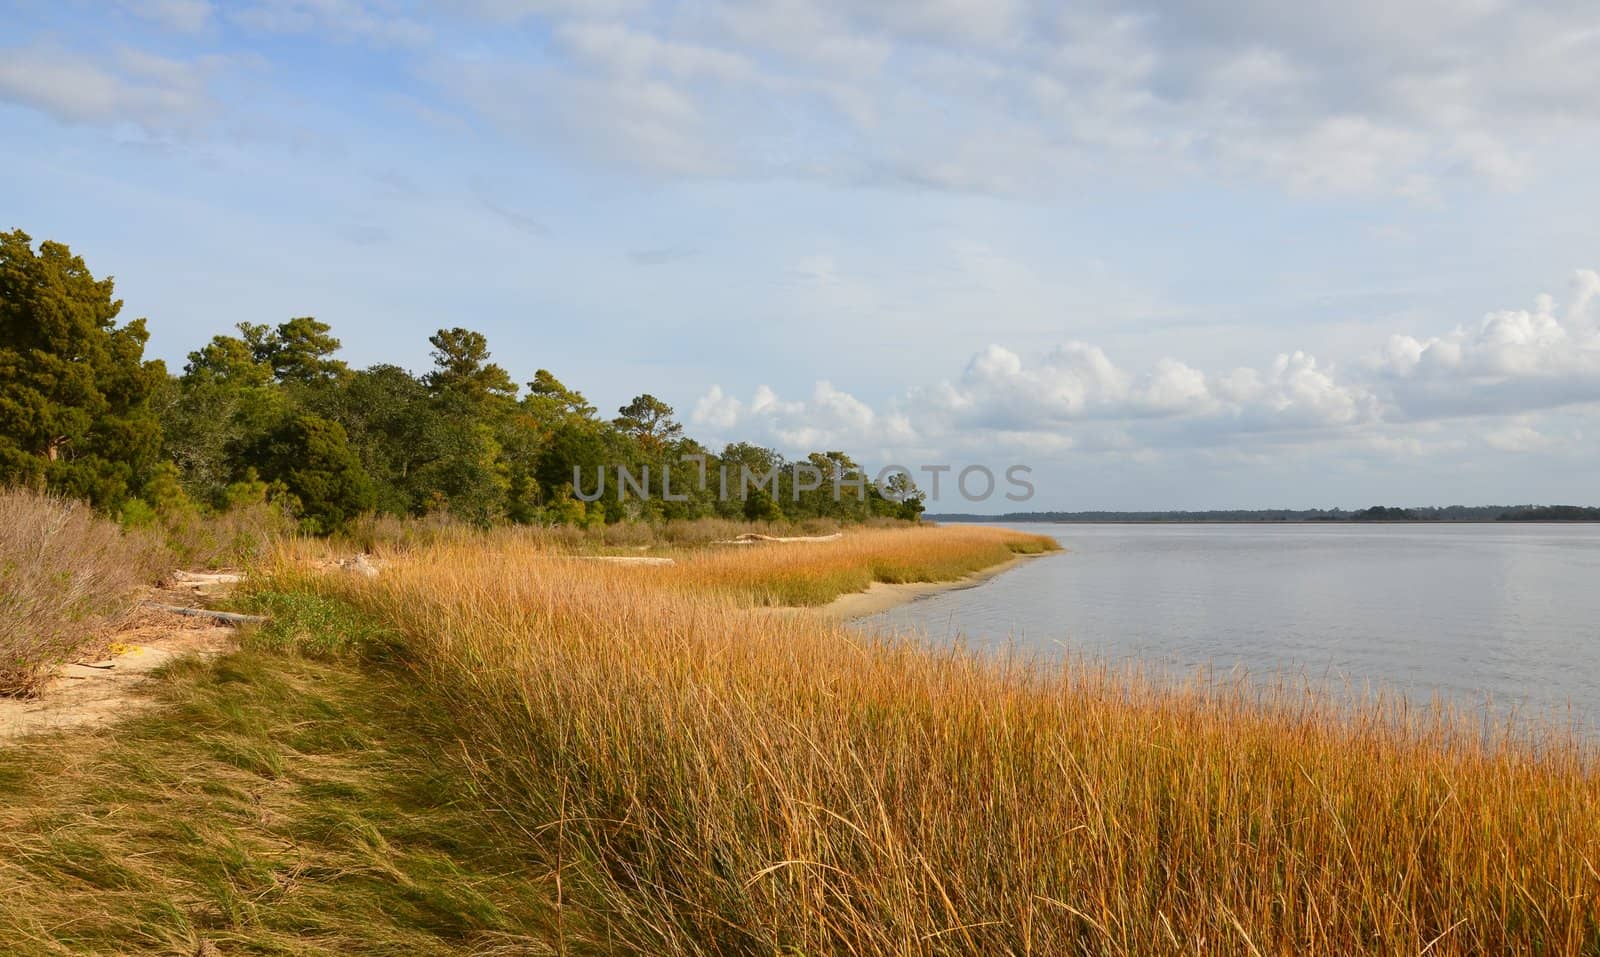 Along the shore in North Carolina with a grass blowing in the breeze. Colors include green, gold and blue.